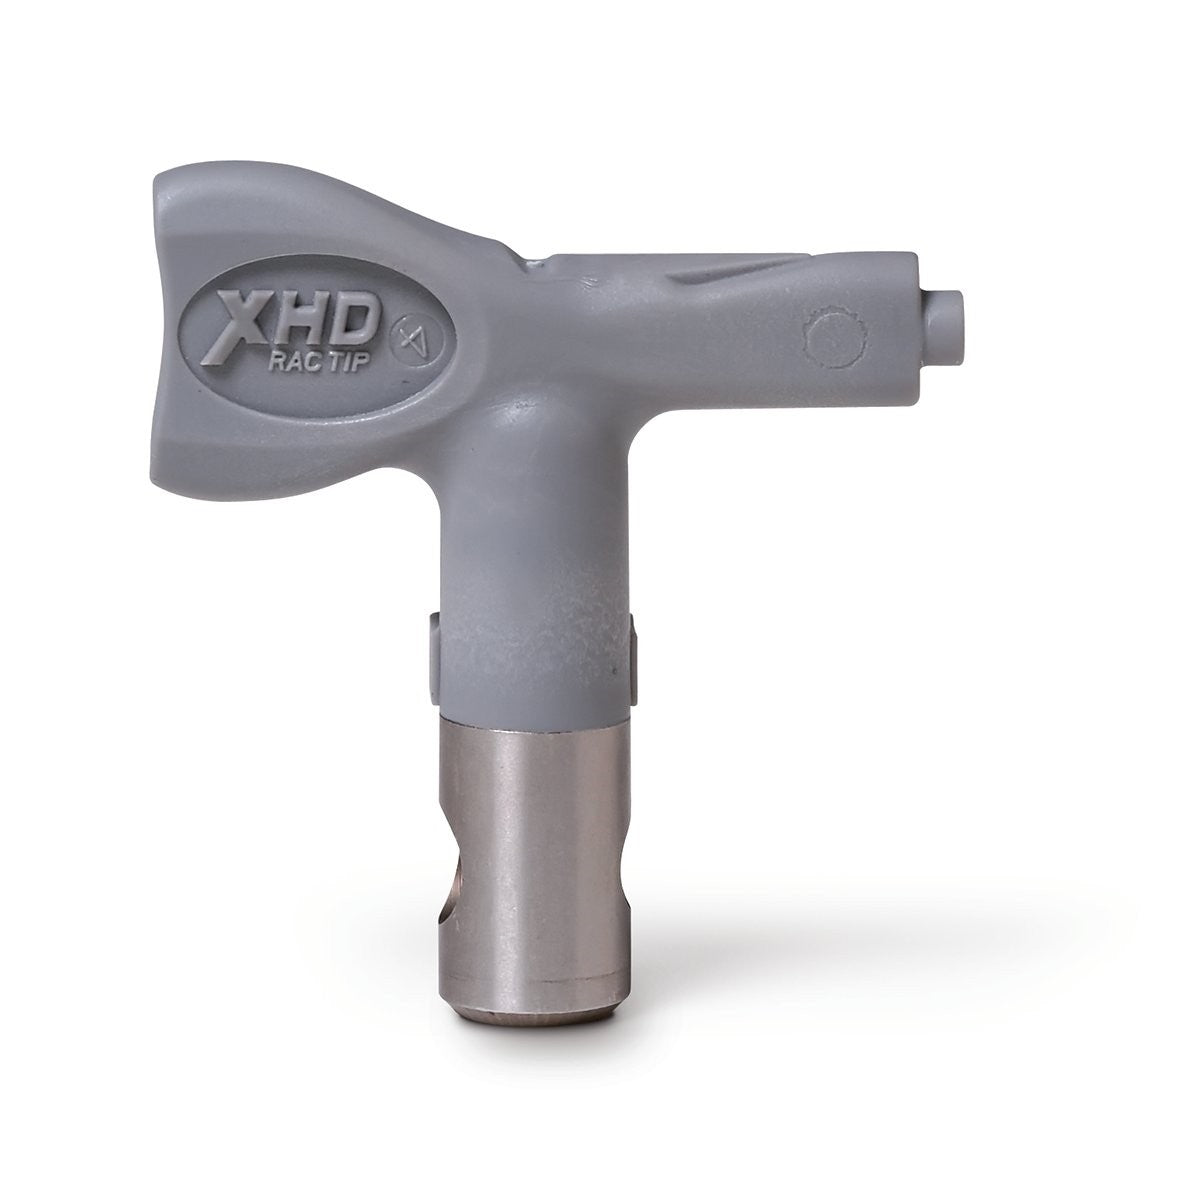 Rac XHD SwitchTip (Small 2-8") - PURspray